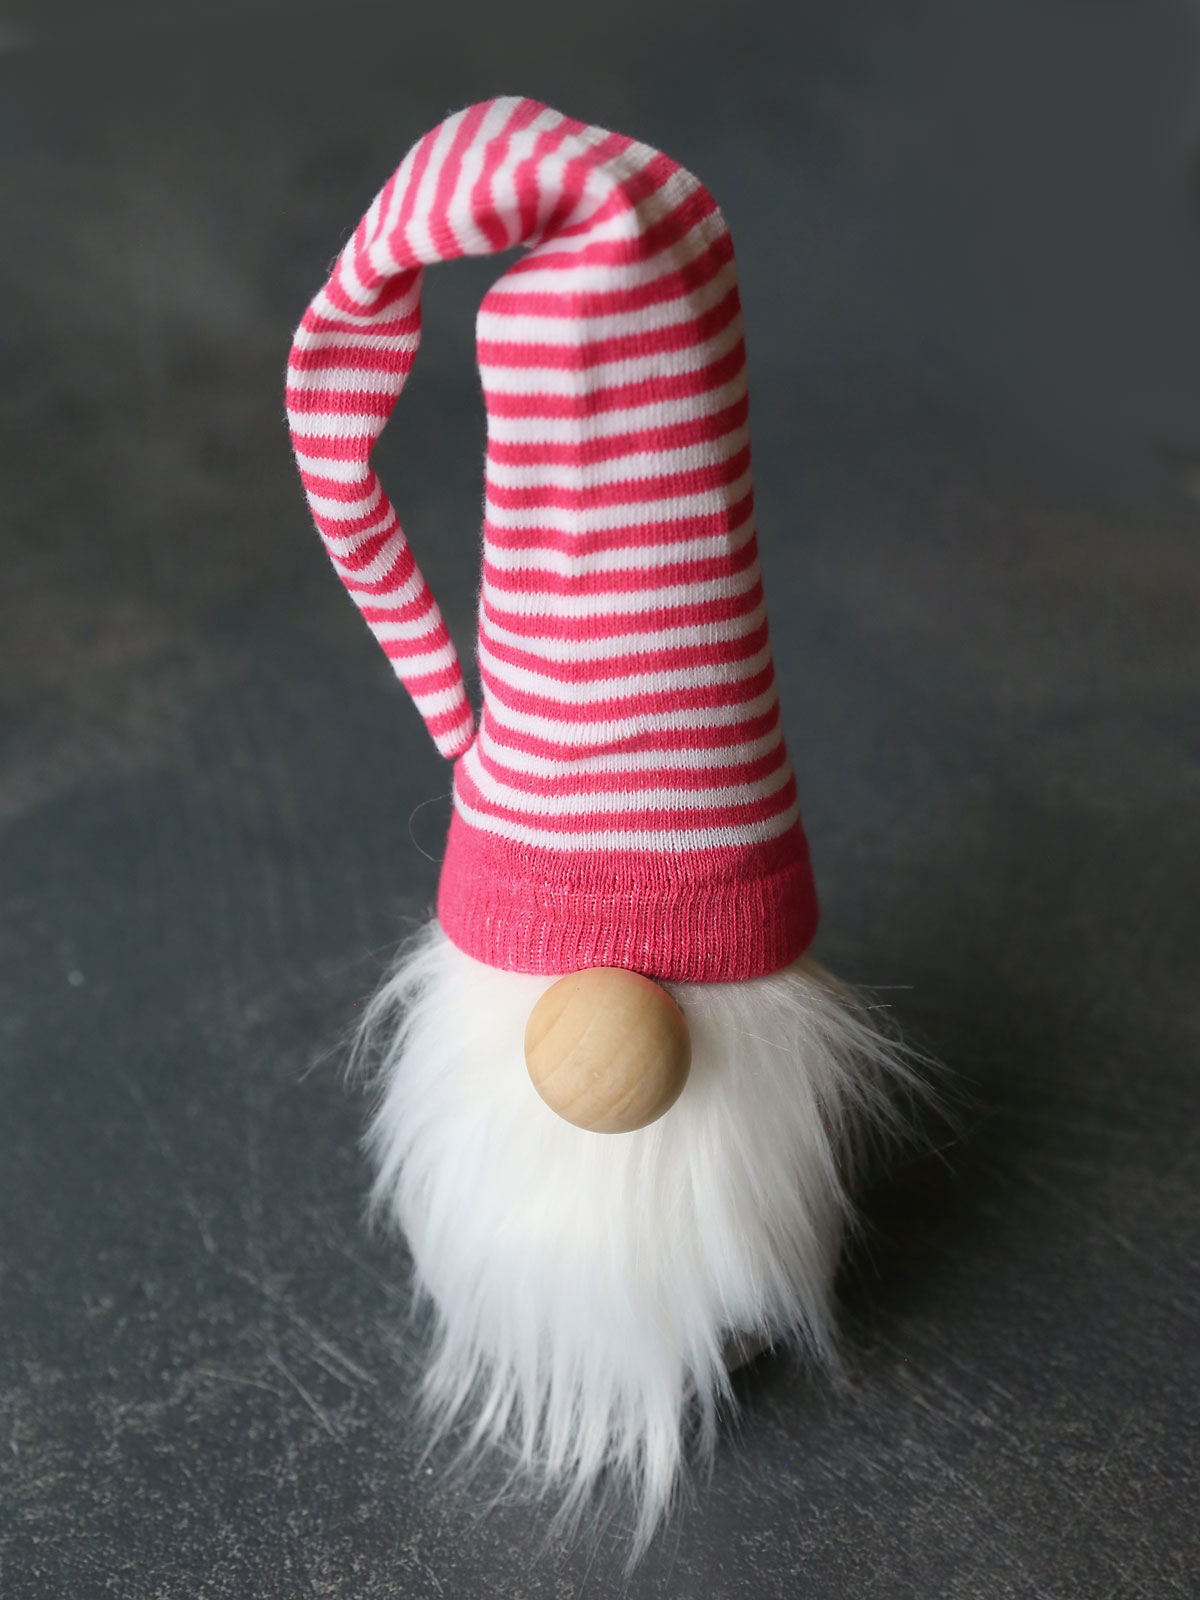 How to make a sock gnome: place hat on top